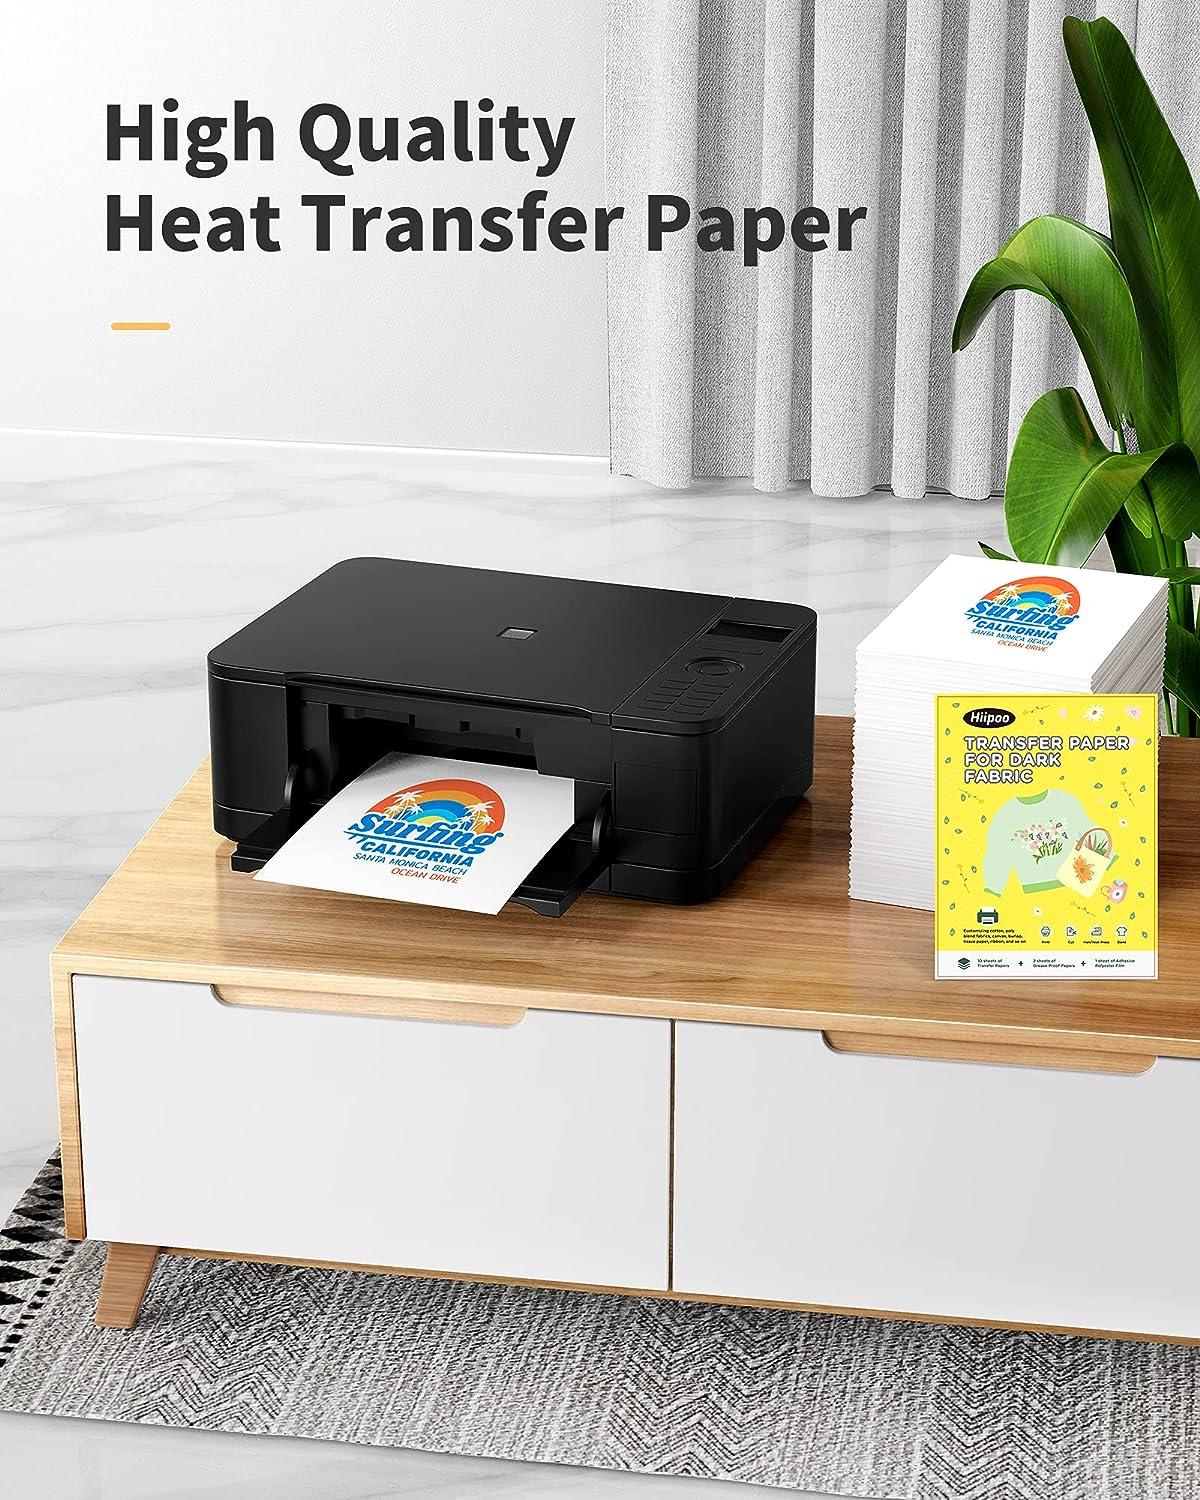 Hiipoo Heat Transfer Paper 8.5x11 Iron-on Transfer Paper for T-Shirt 30  Sheets Printable and Washable Dark Transfer Paper for Inkjet Printer